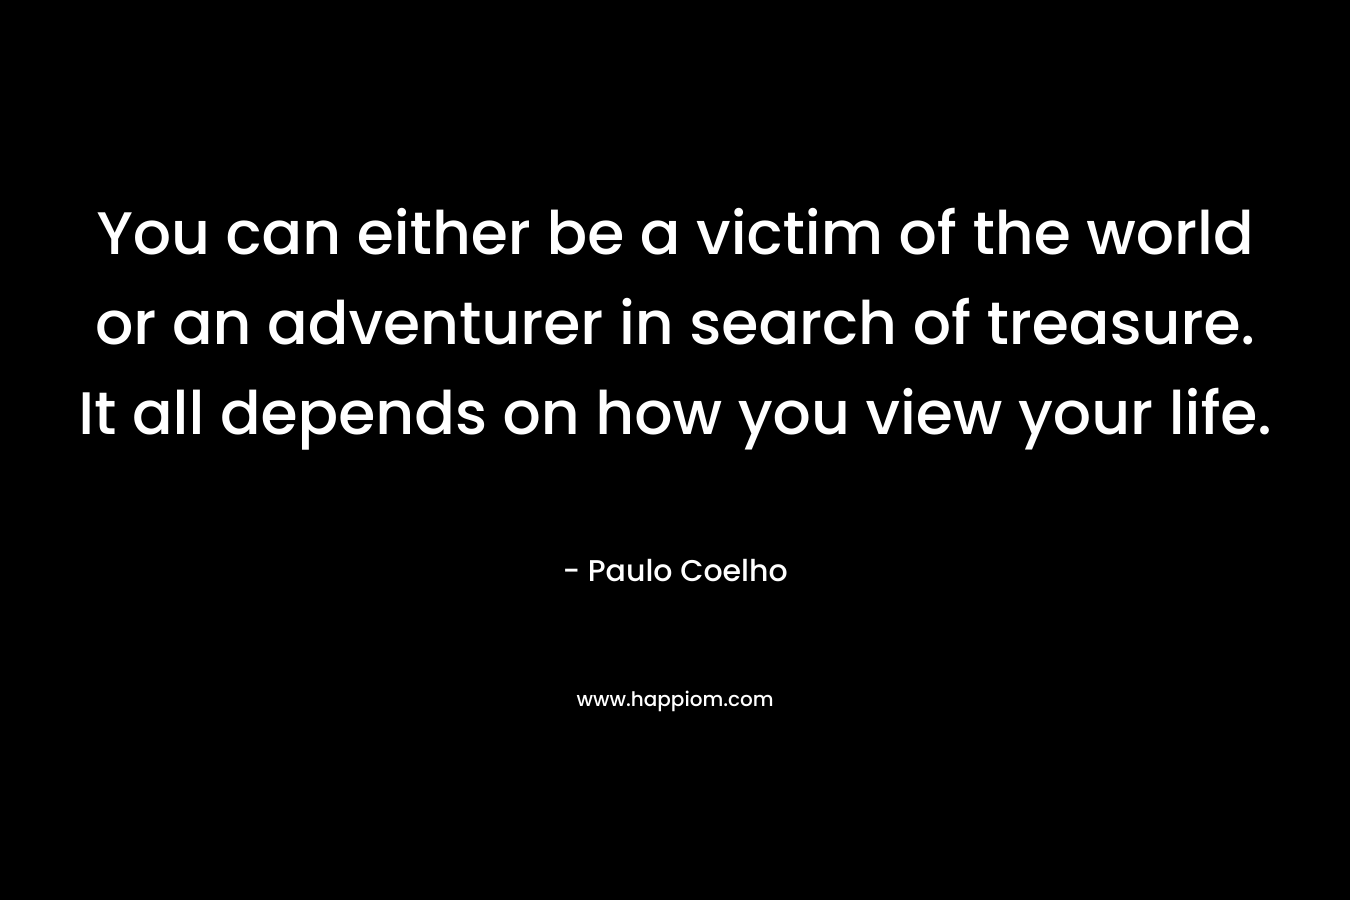 You can either be a victim of the world or an adventurer in search of treasure. It all depends on how you view your life. – Paulo Coelho